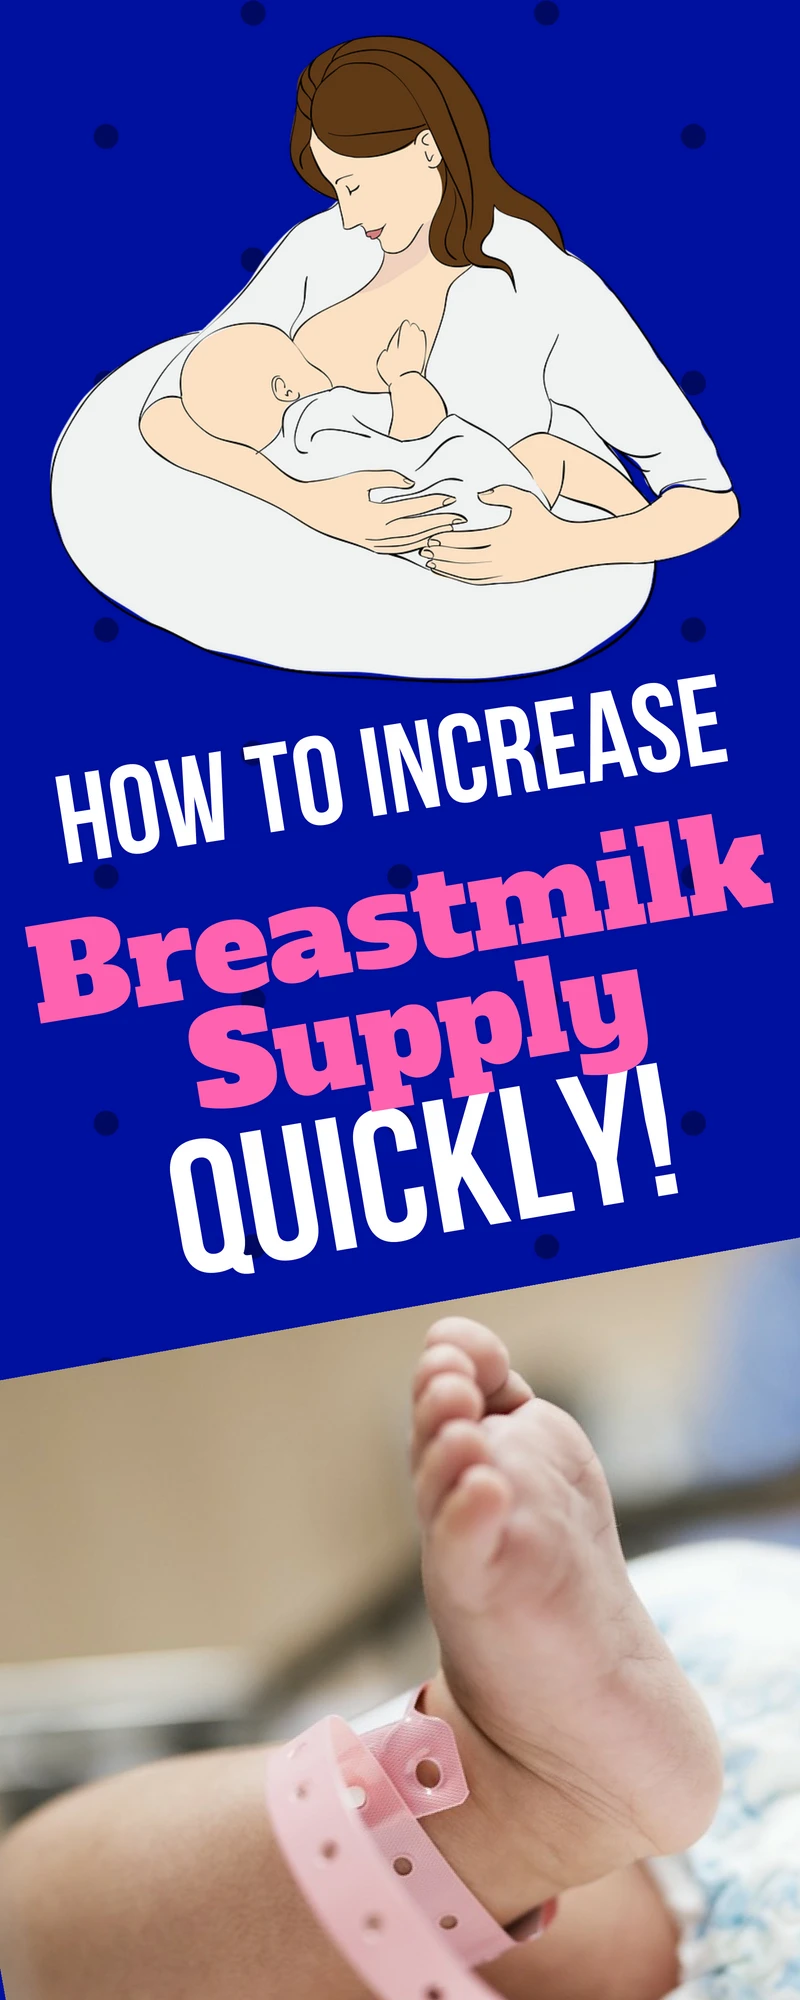 increase breastmilk How to Increase Breast Milk Supply For successful breastfeeding it's important to follow some simple steps to help increase breastmilk supply quickly.  The sooner your milk comes in the more successful you will feel about breastfeeding your baby.  These steps for how to increase breastmilk supply will help you achieve this!